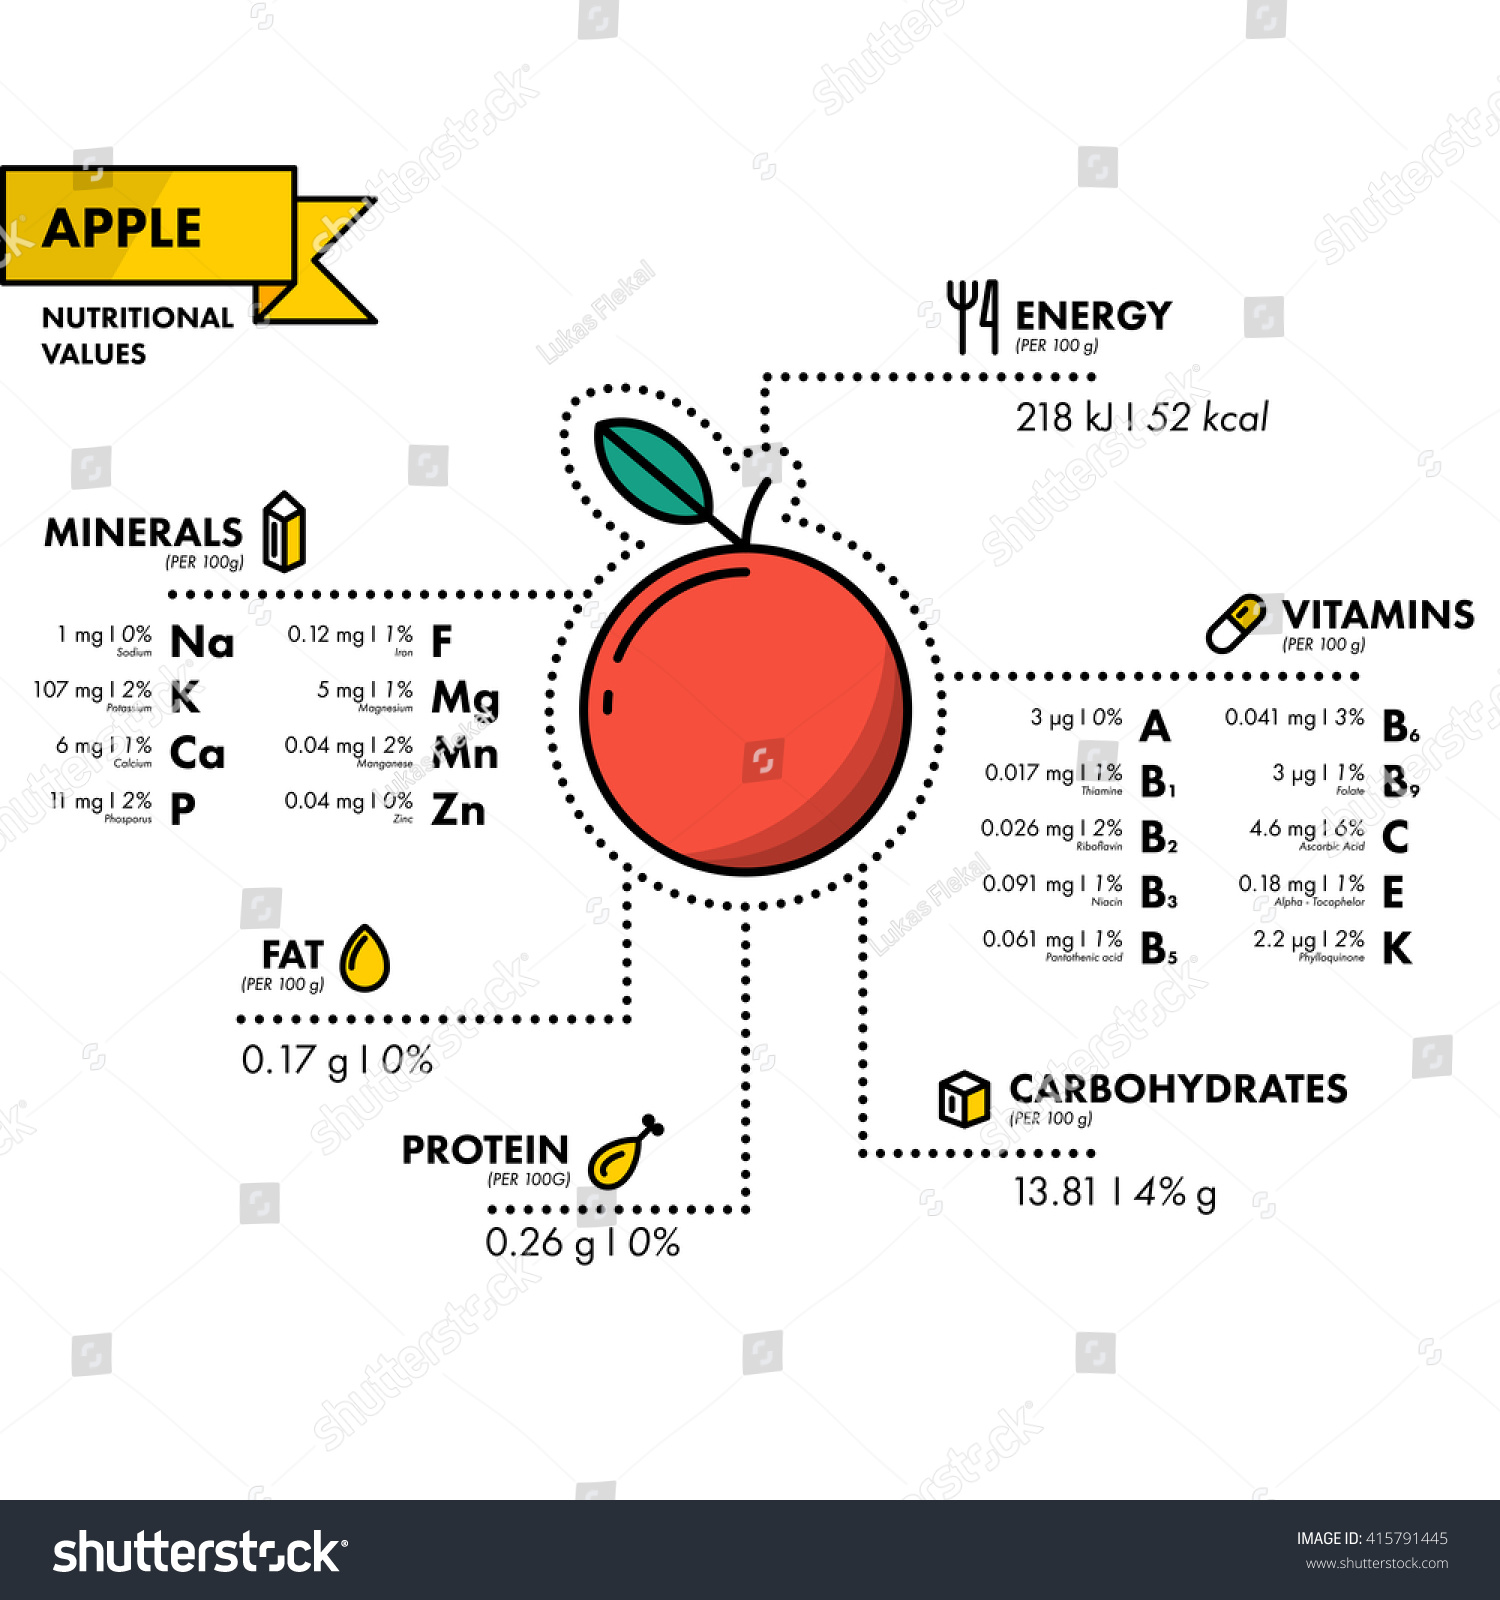 Apple Nutritional Information Healthy Diet Simple Stock Vector pertaining to Healthy Diet Information